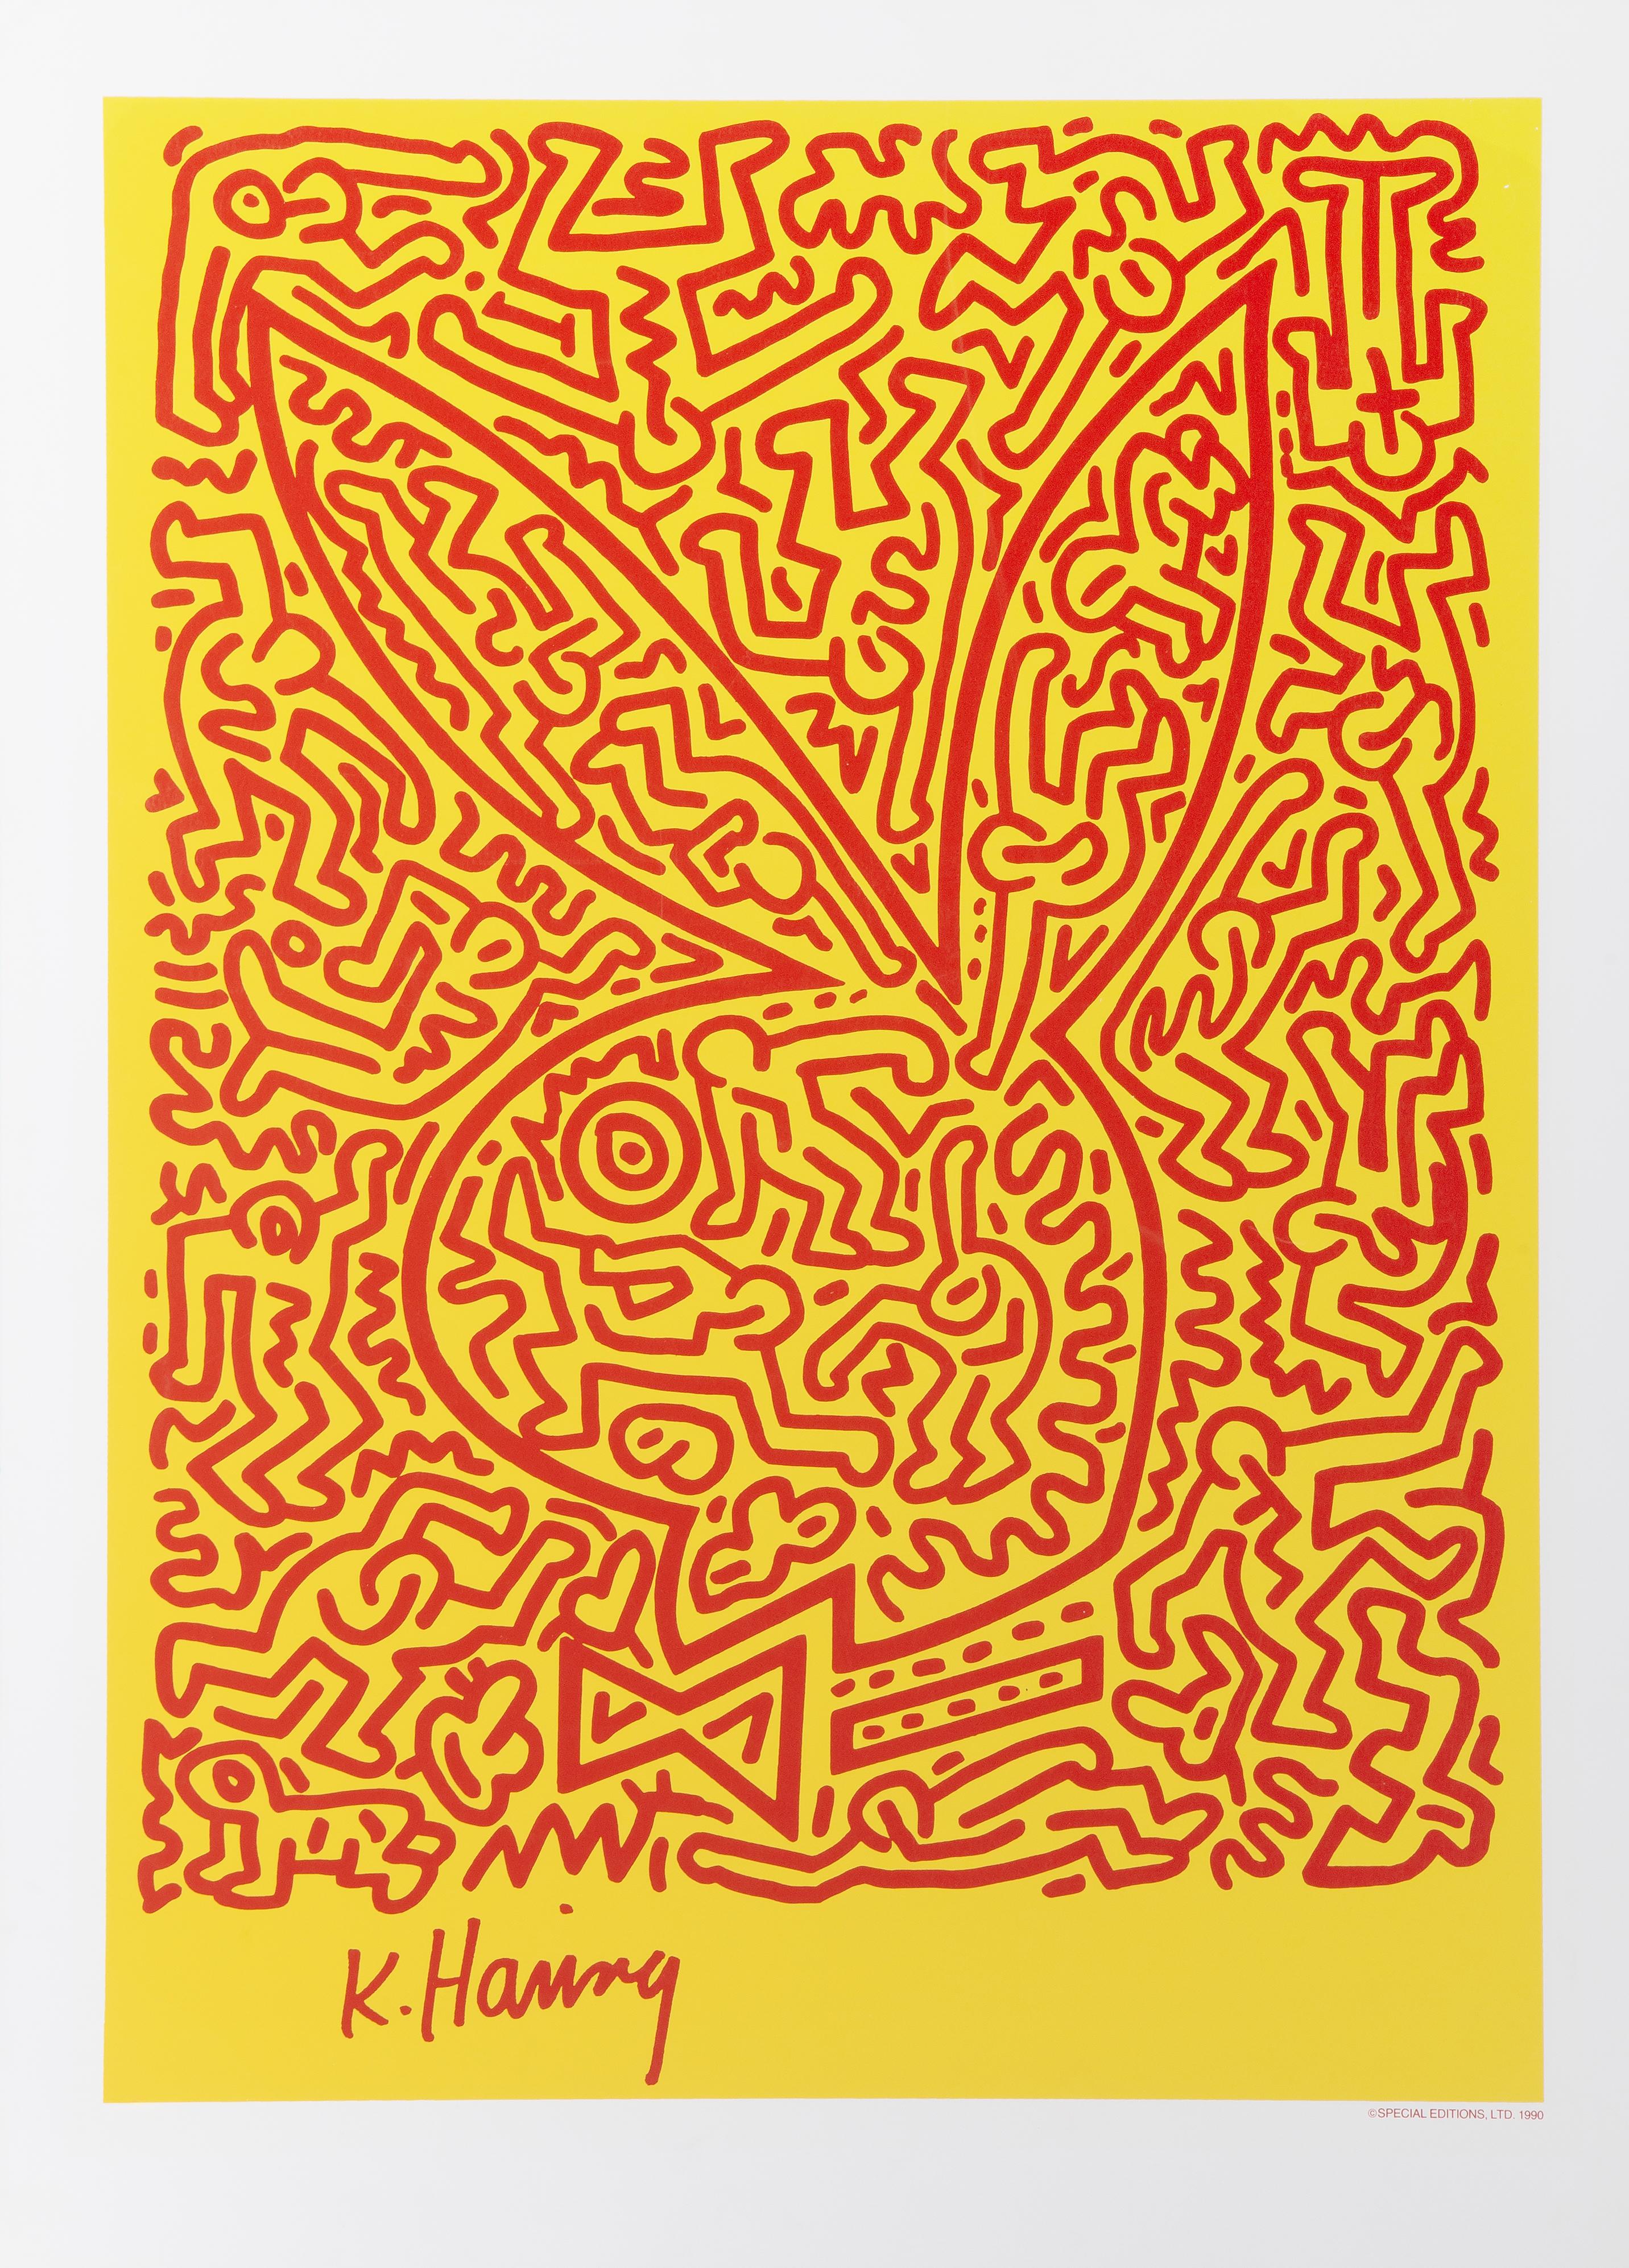 Affiche Playboy Bunny par Keith Haring, 1990